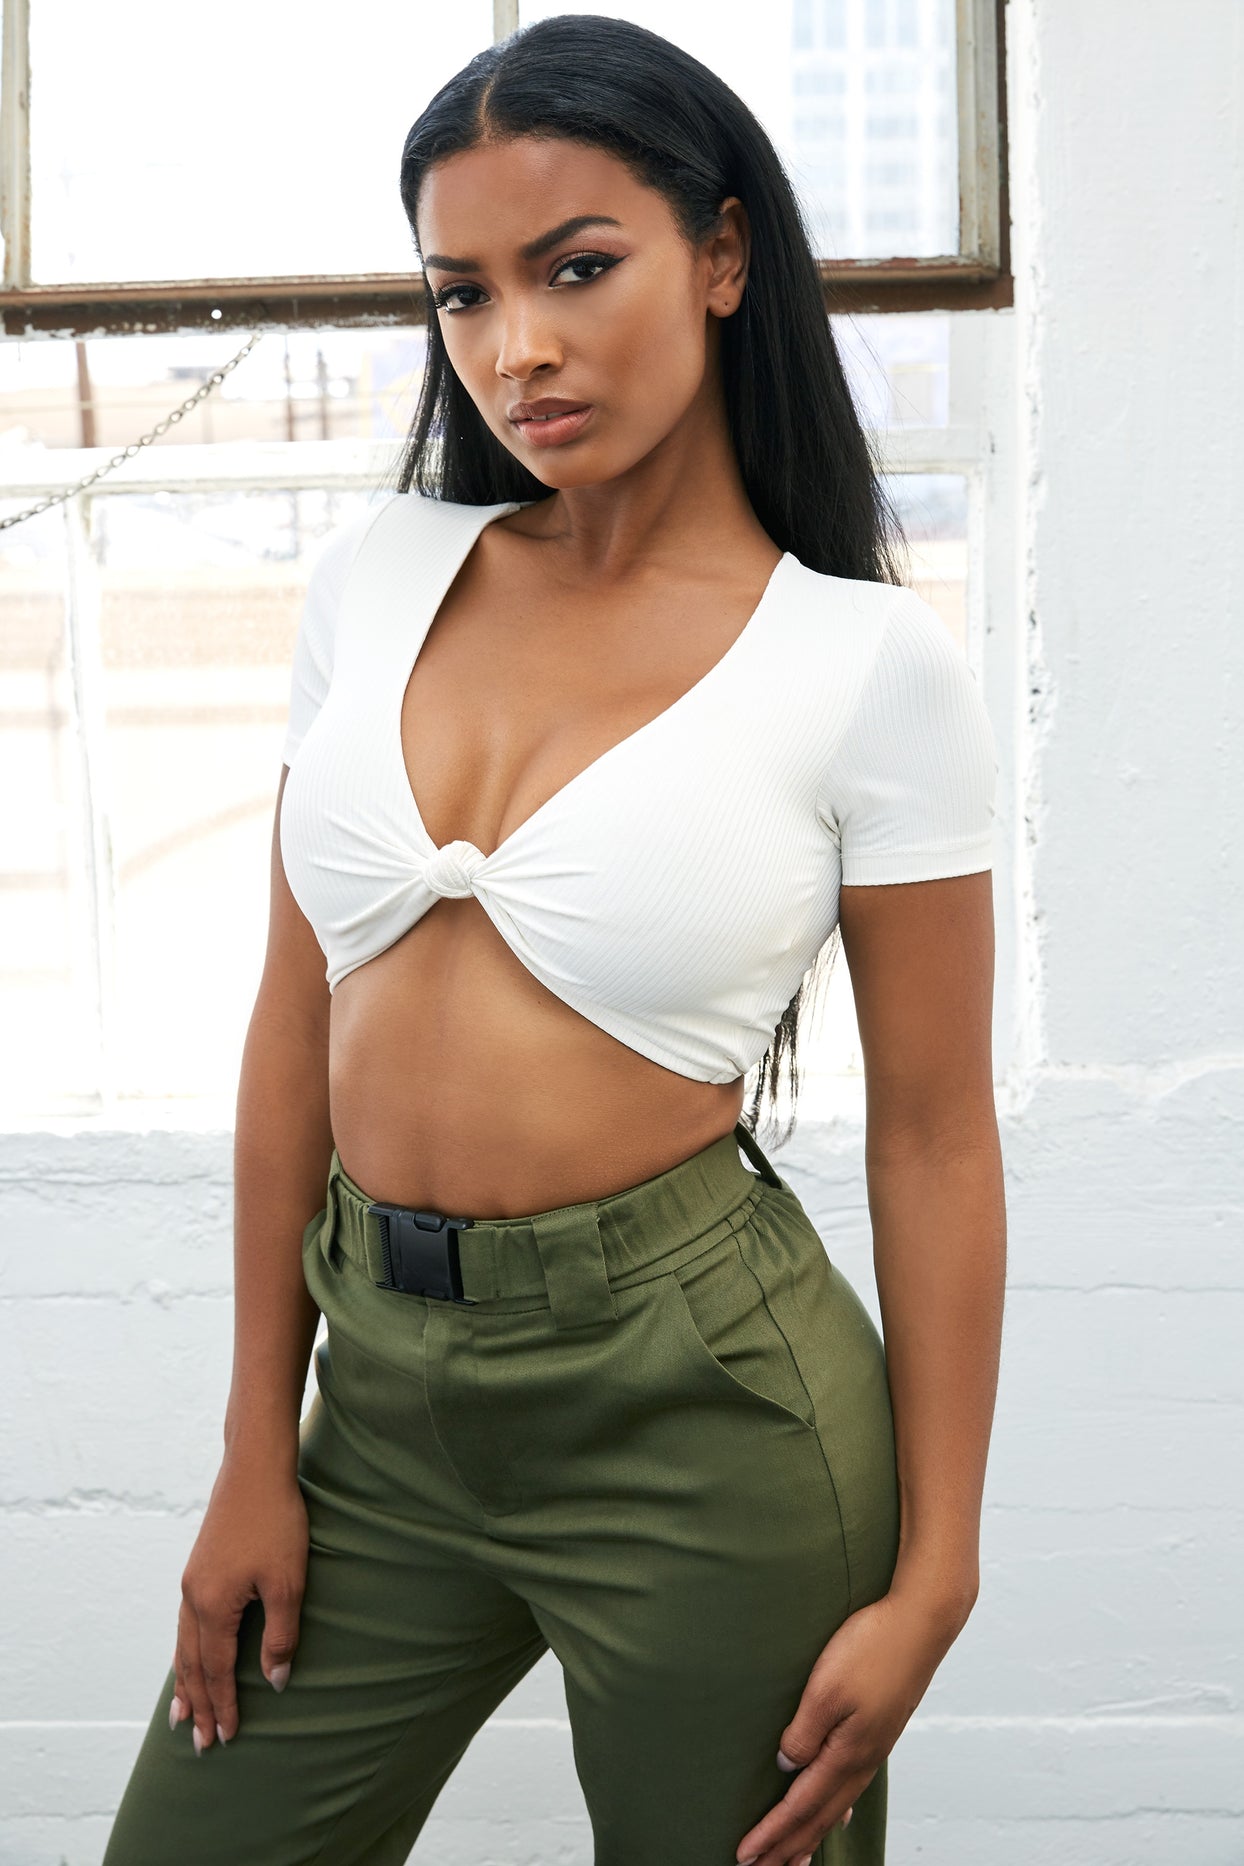 Knotty Girl Knot Front Crop Top em branco